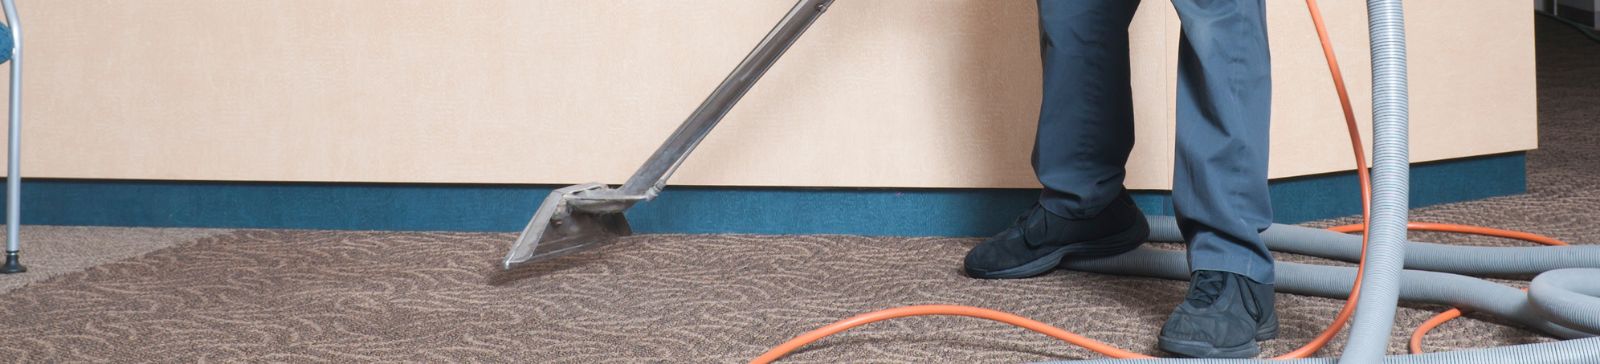 Dirty Carpet? Time for Commercial Carpet Cleaning Help